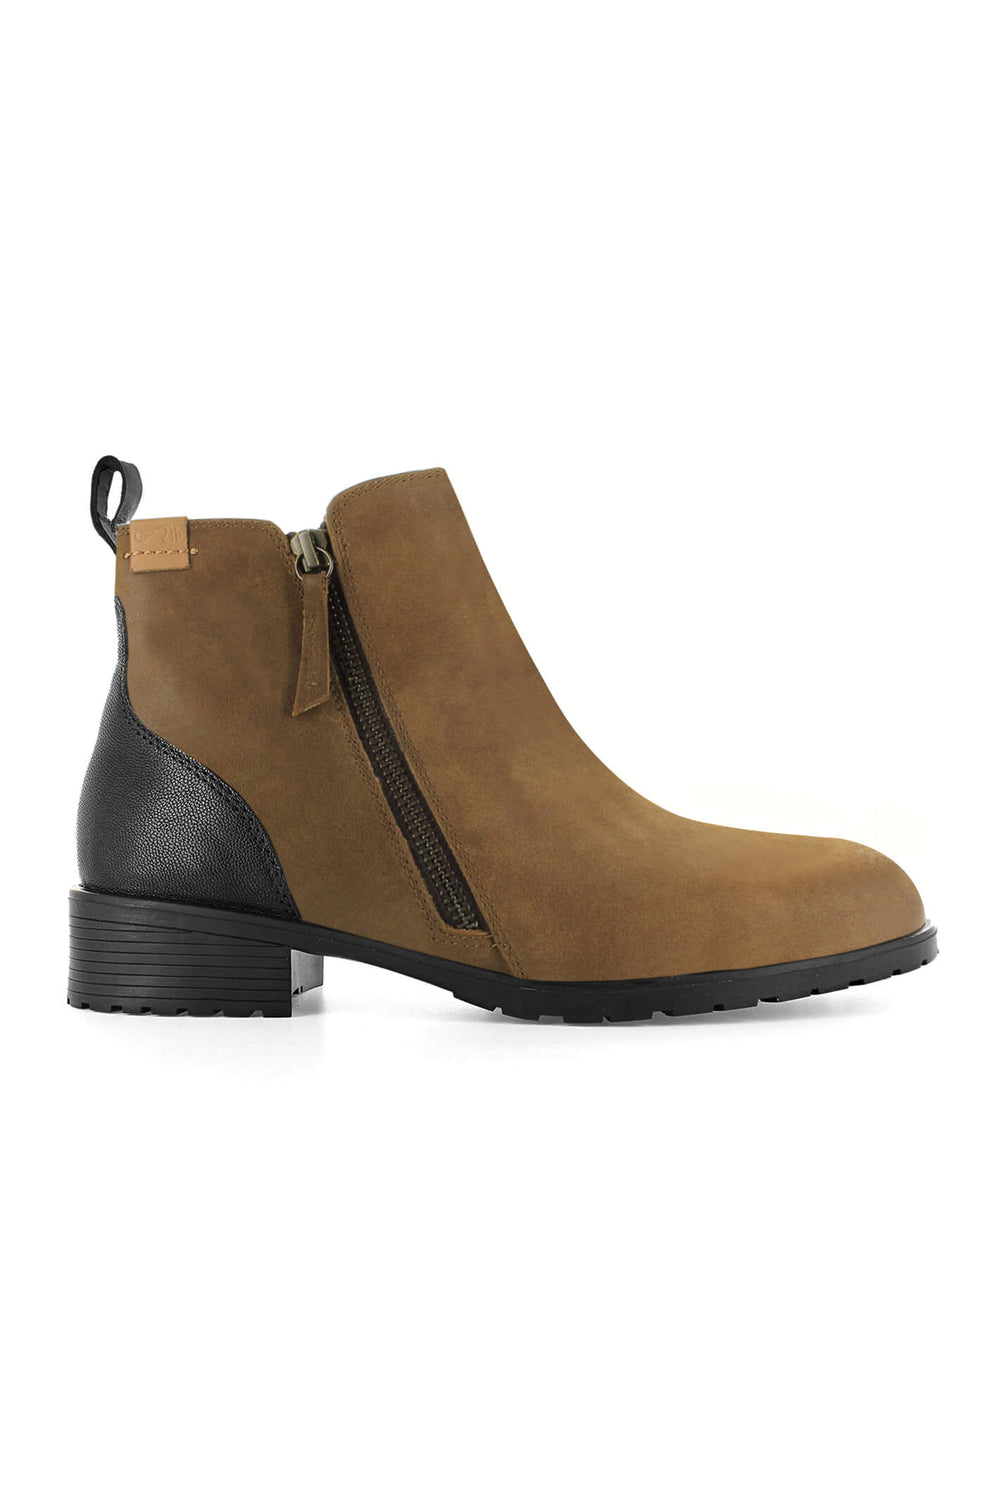 Strive Sandringham Tobacco Brown Zip Up Leather Boots - Shirley Allum Boutique